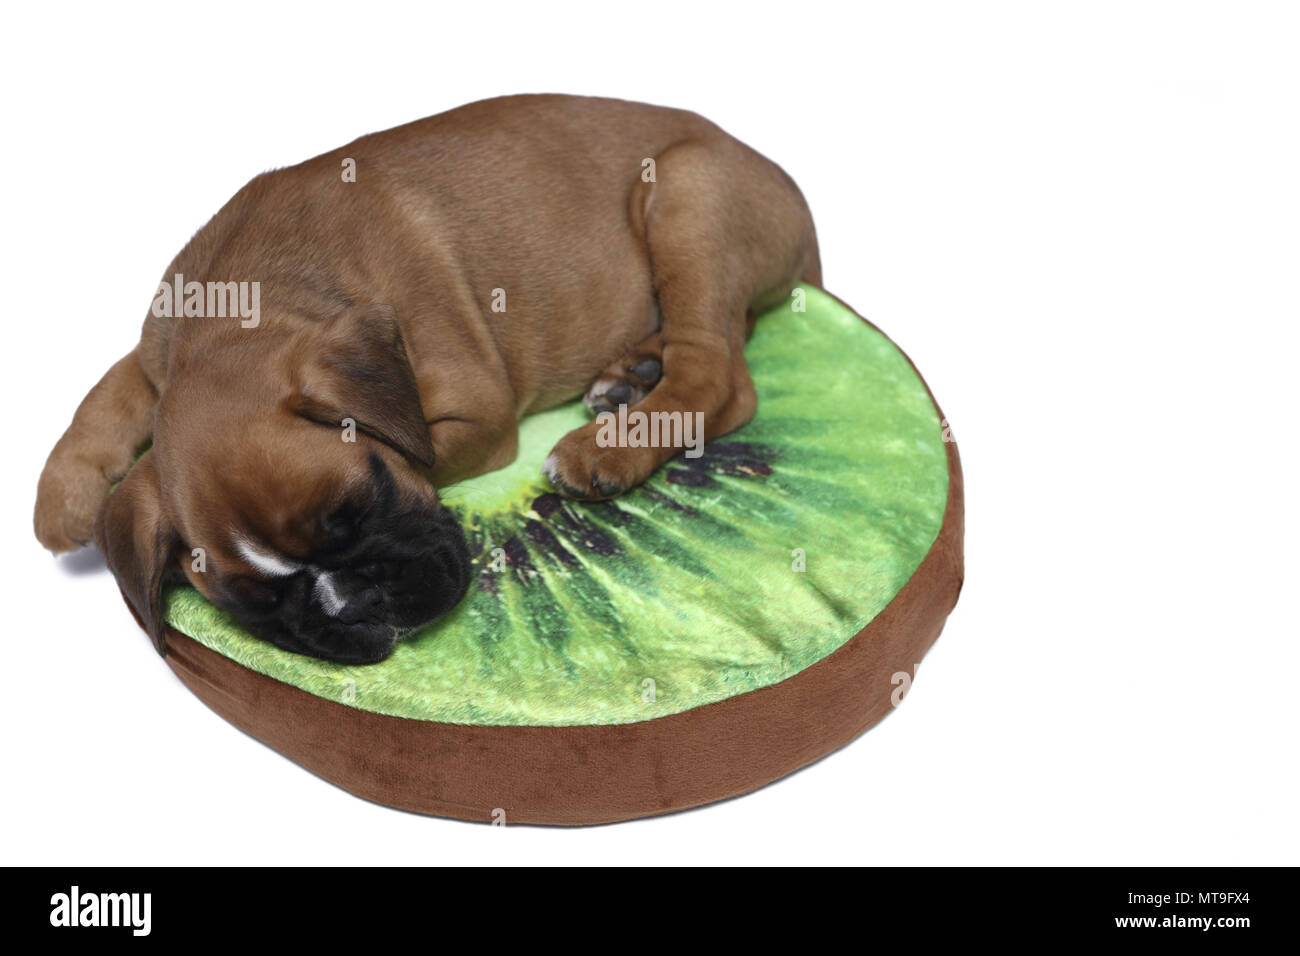 German Boxer. Puppy (7 weeks old) sleeping on a kiwi-shaped cushion. Studio picture Stock Photo